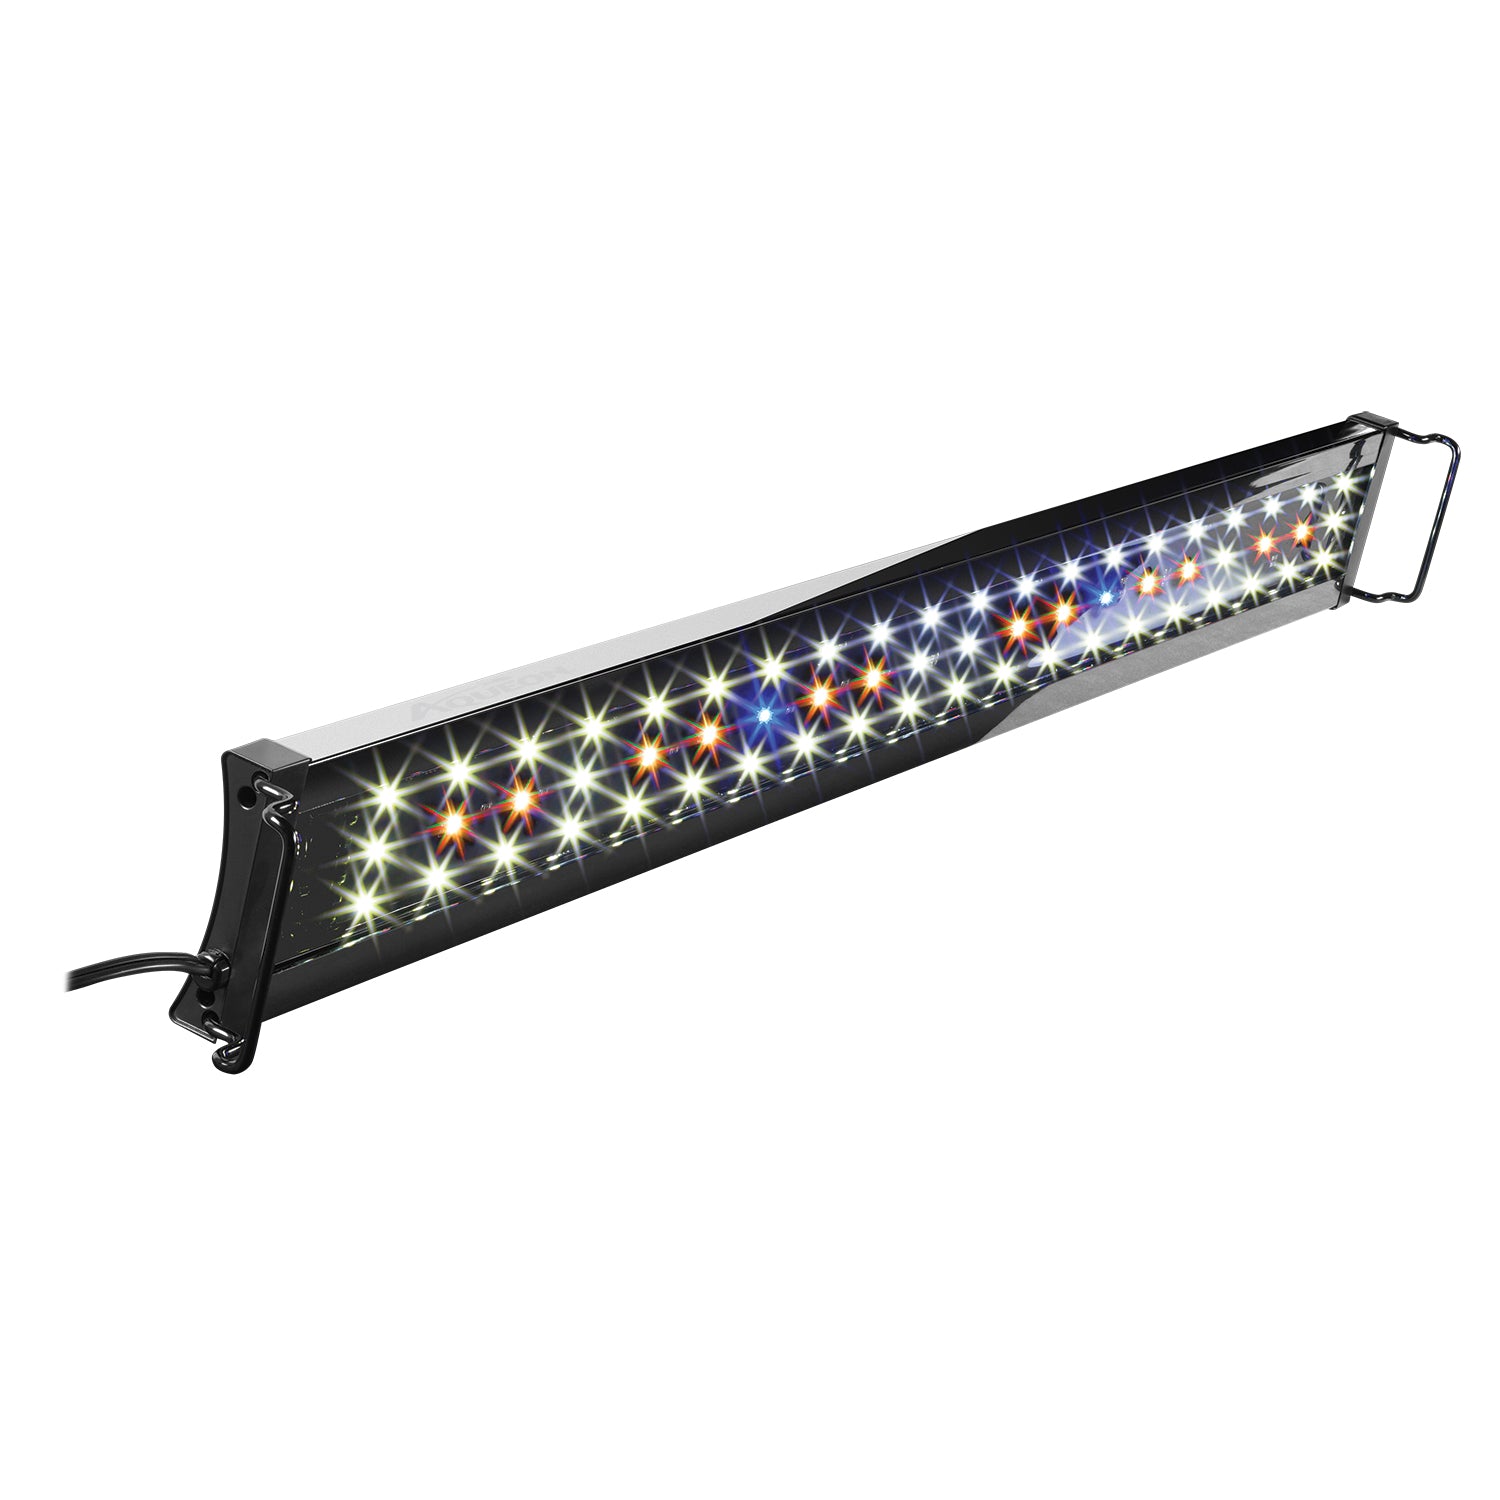 Aqueon LED OptiBright+ Light Fixture with Remote - 30 - 36 inch